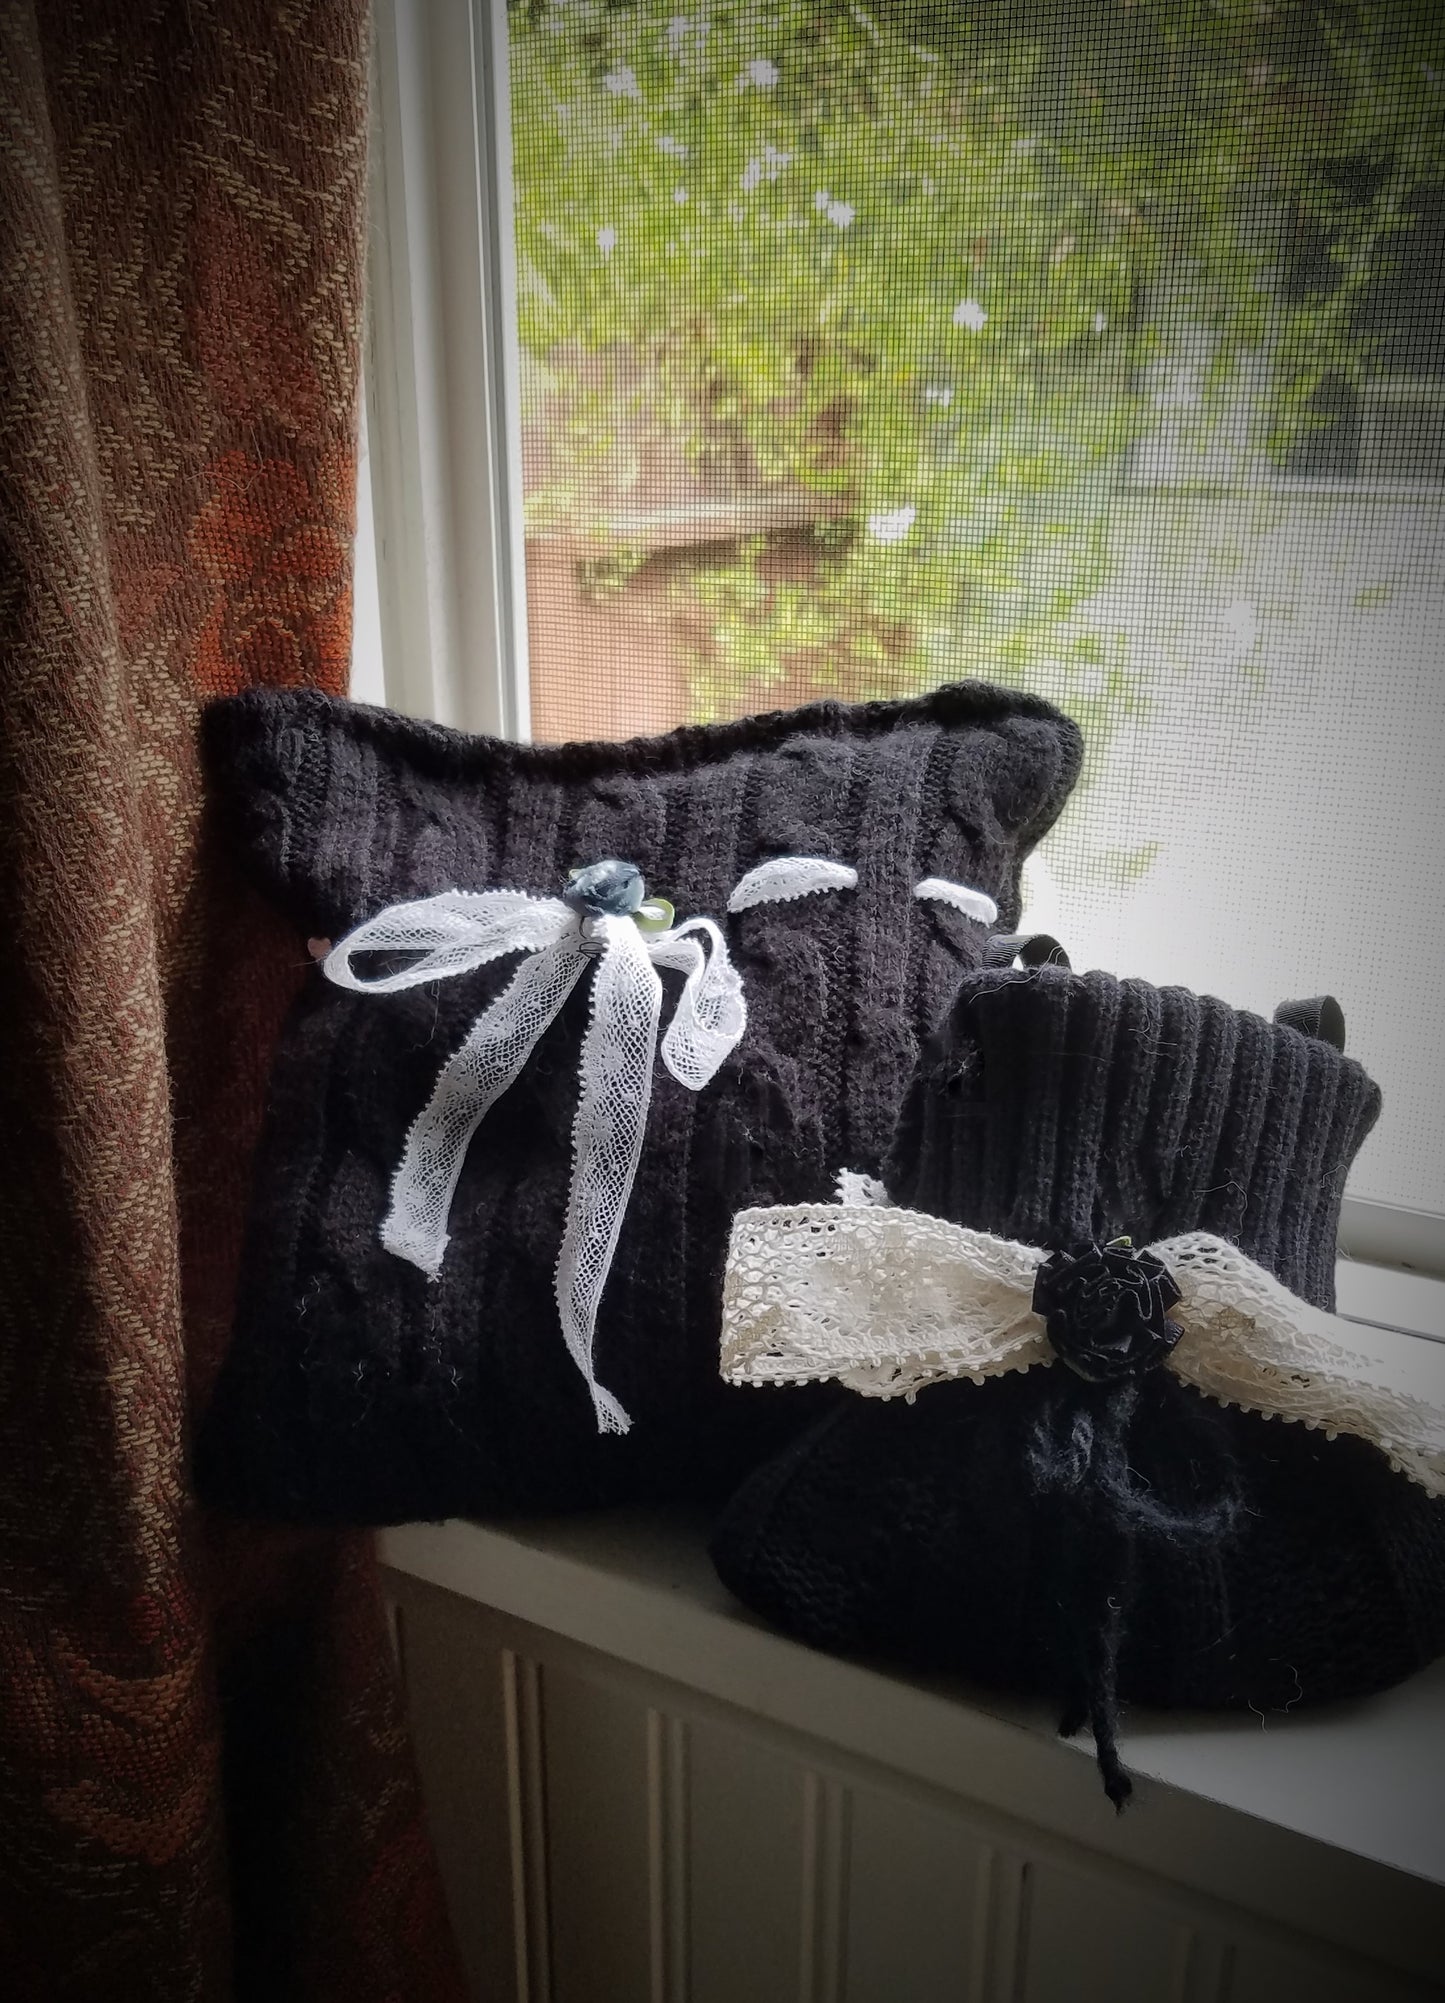 Hand Sewn Lavender Filled Dream or Comfort Pillow in Black